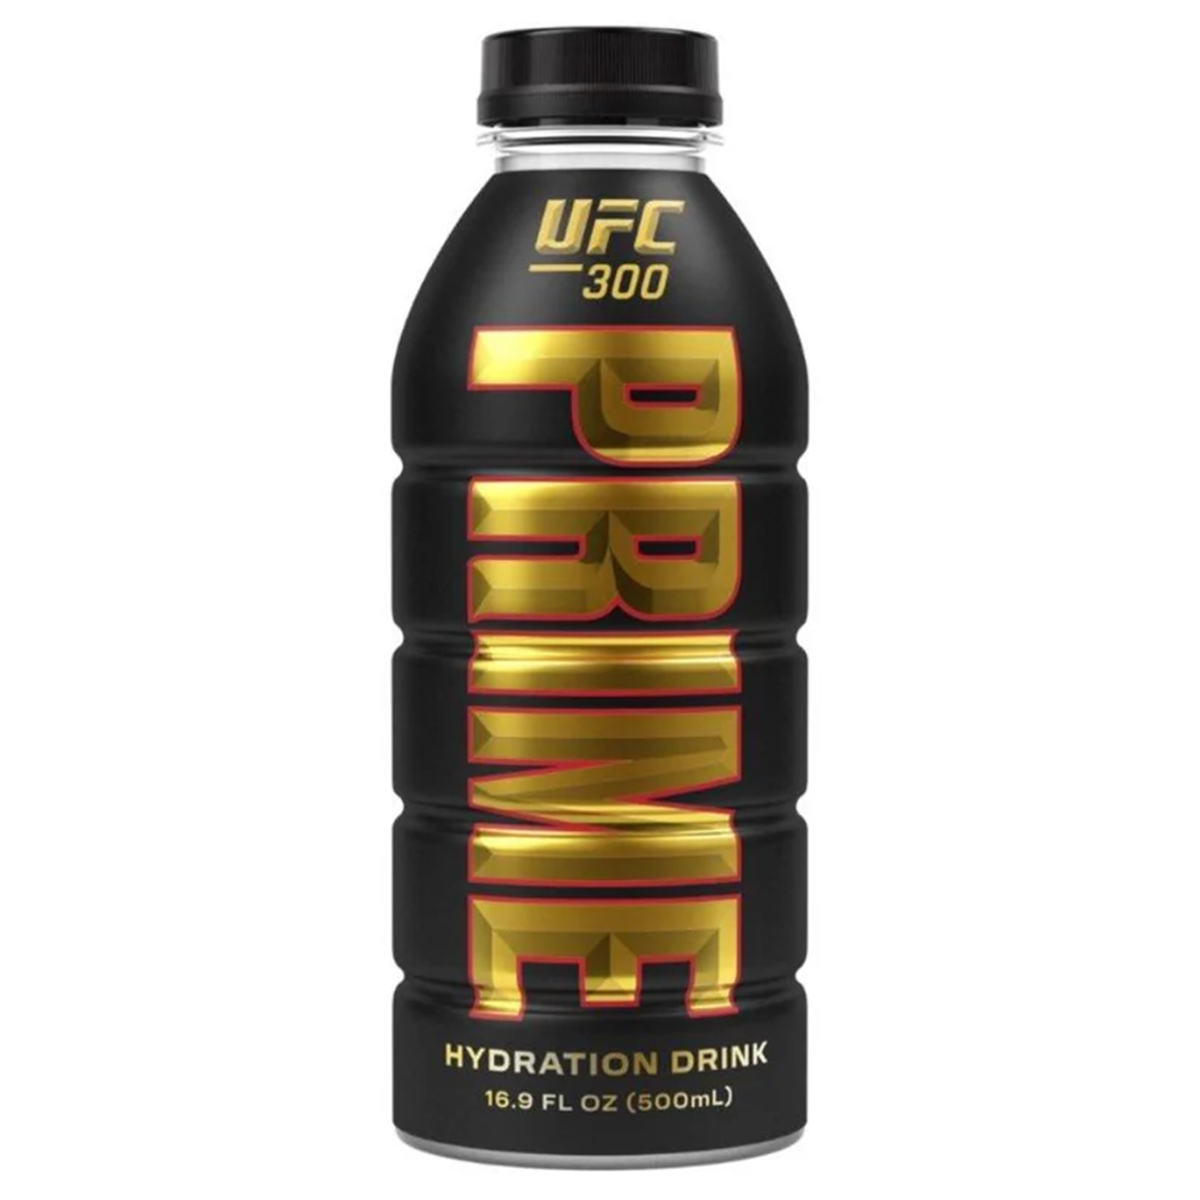 PRIME UFC300 Limited Edition Sports Drink